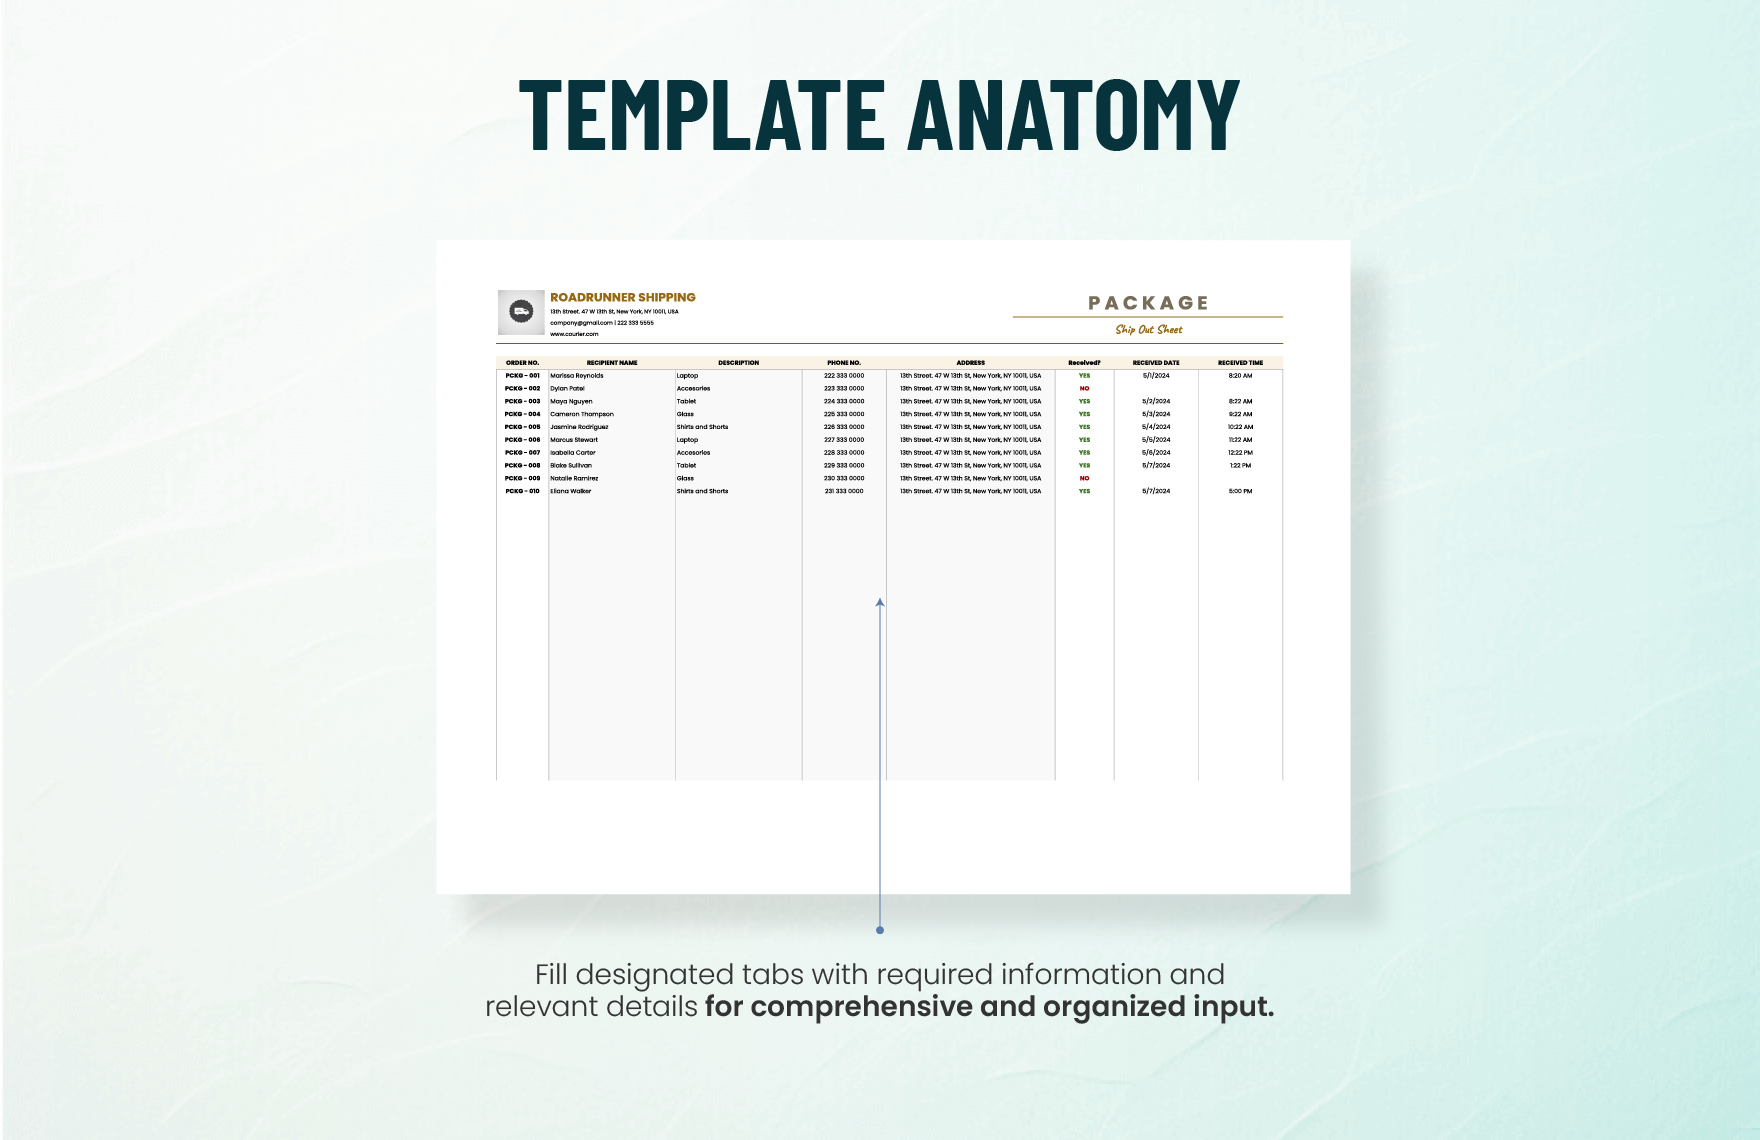 Package Sign Out Sheet Template